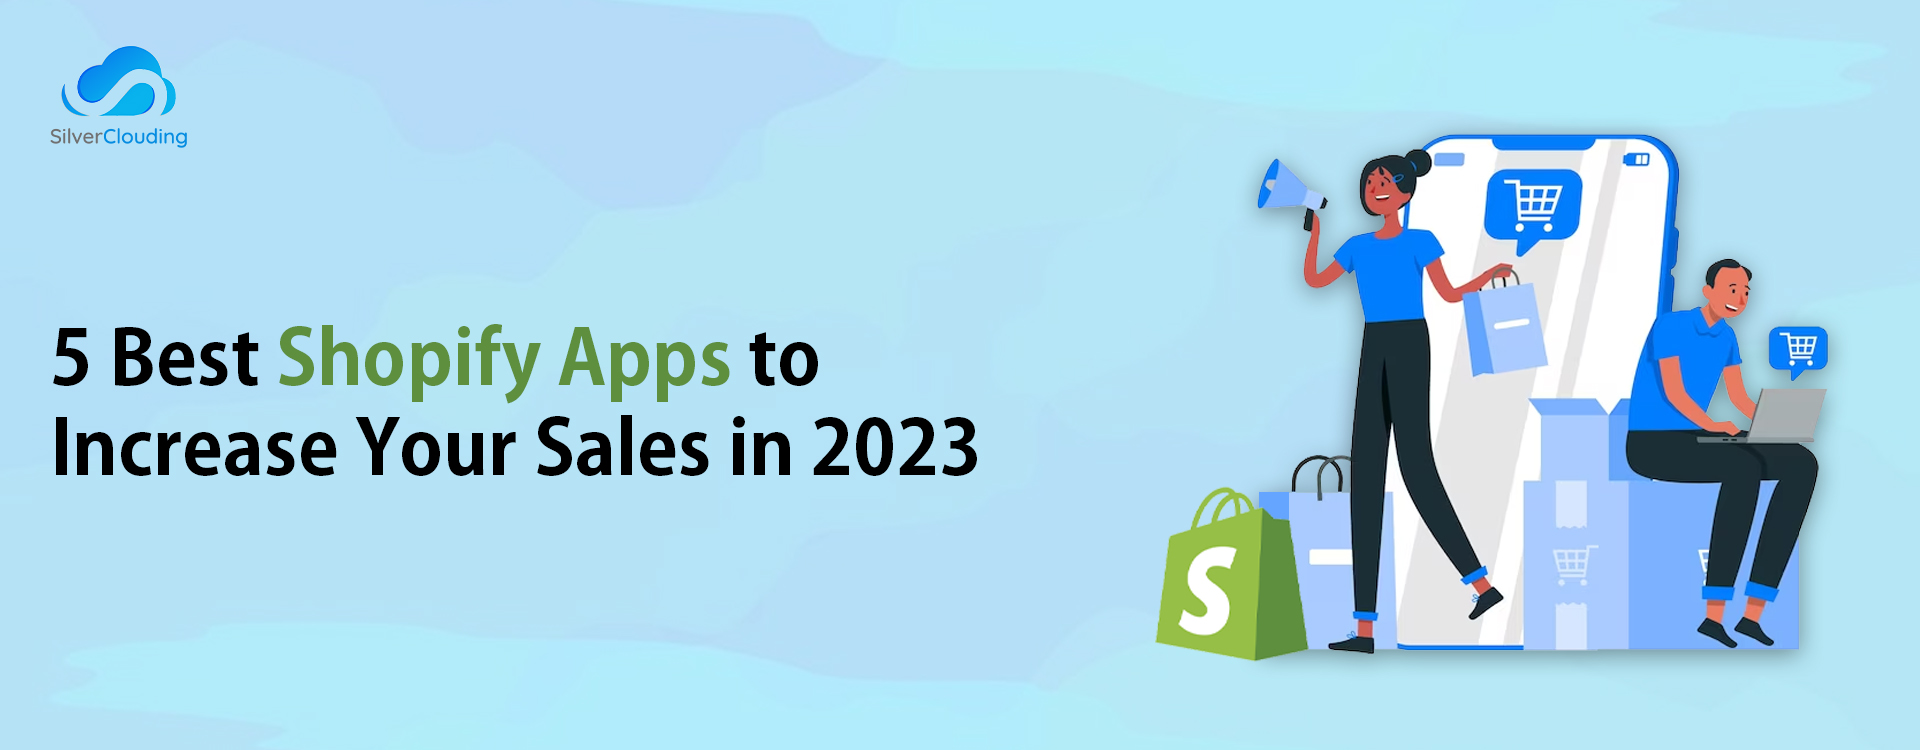 5 Best Shopify Apps to Increase Your Sales in 2023